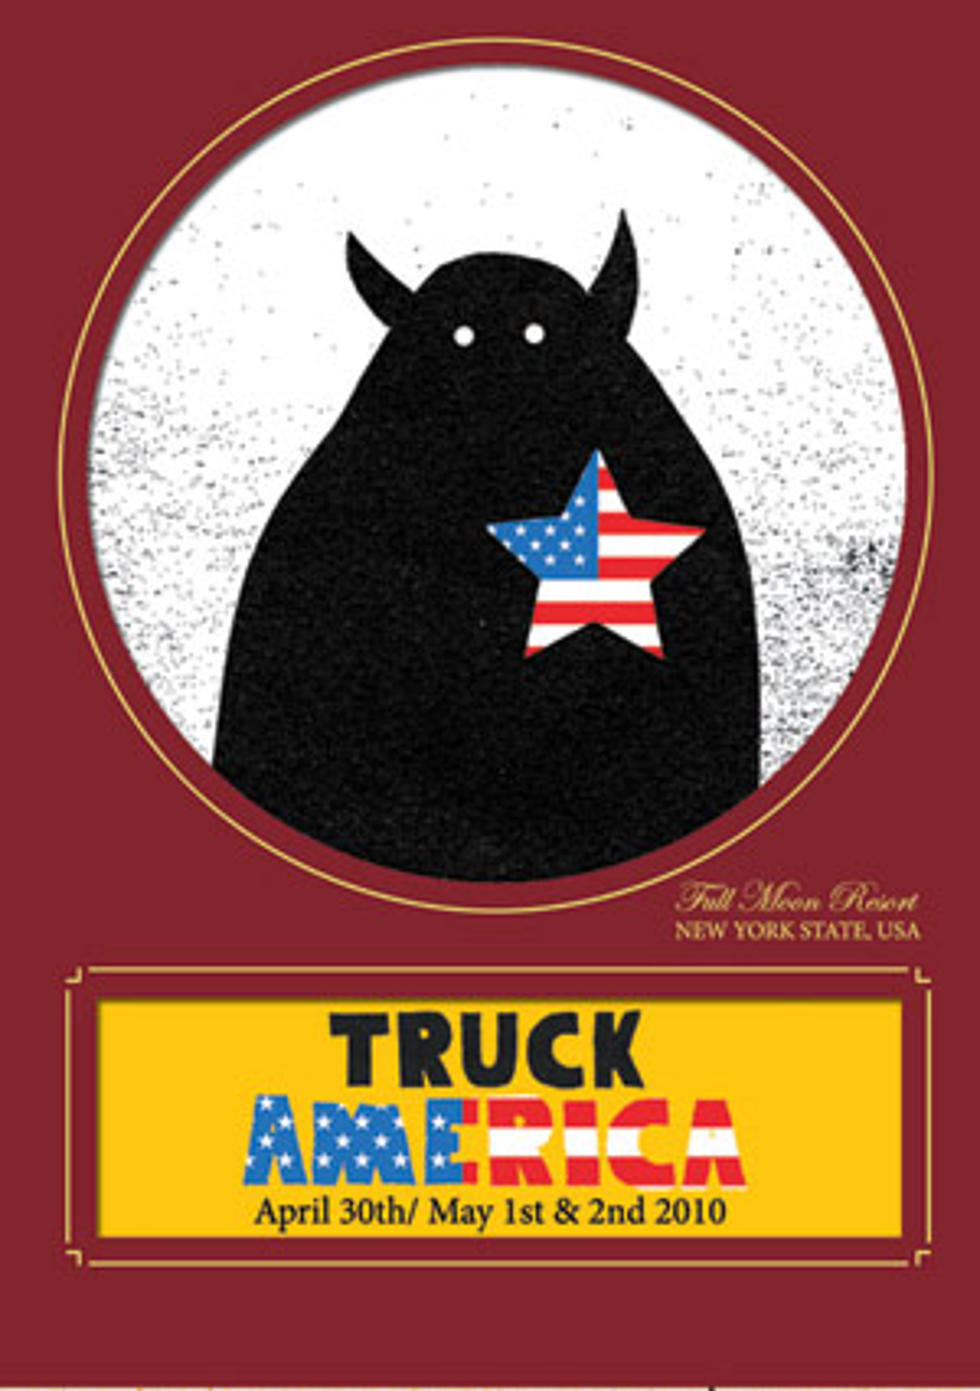 Truck America comes to Big Indian, NY in 2010 &#8211; lineup includes Mercury Rev, White Rabbits, Neil Halstead, more